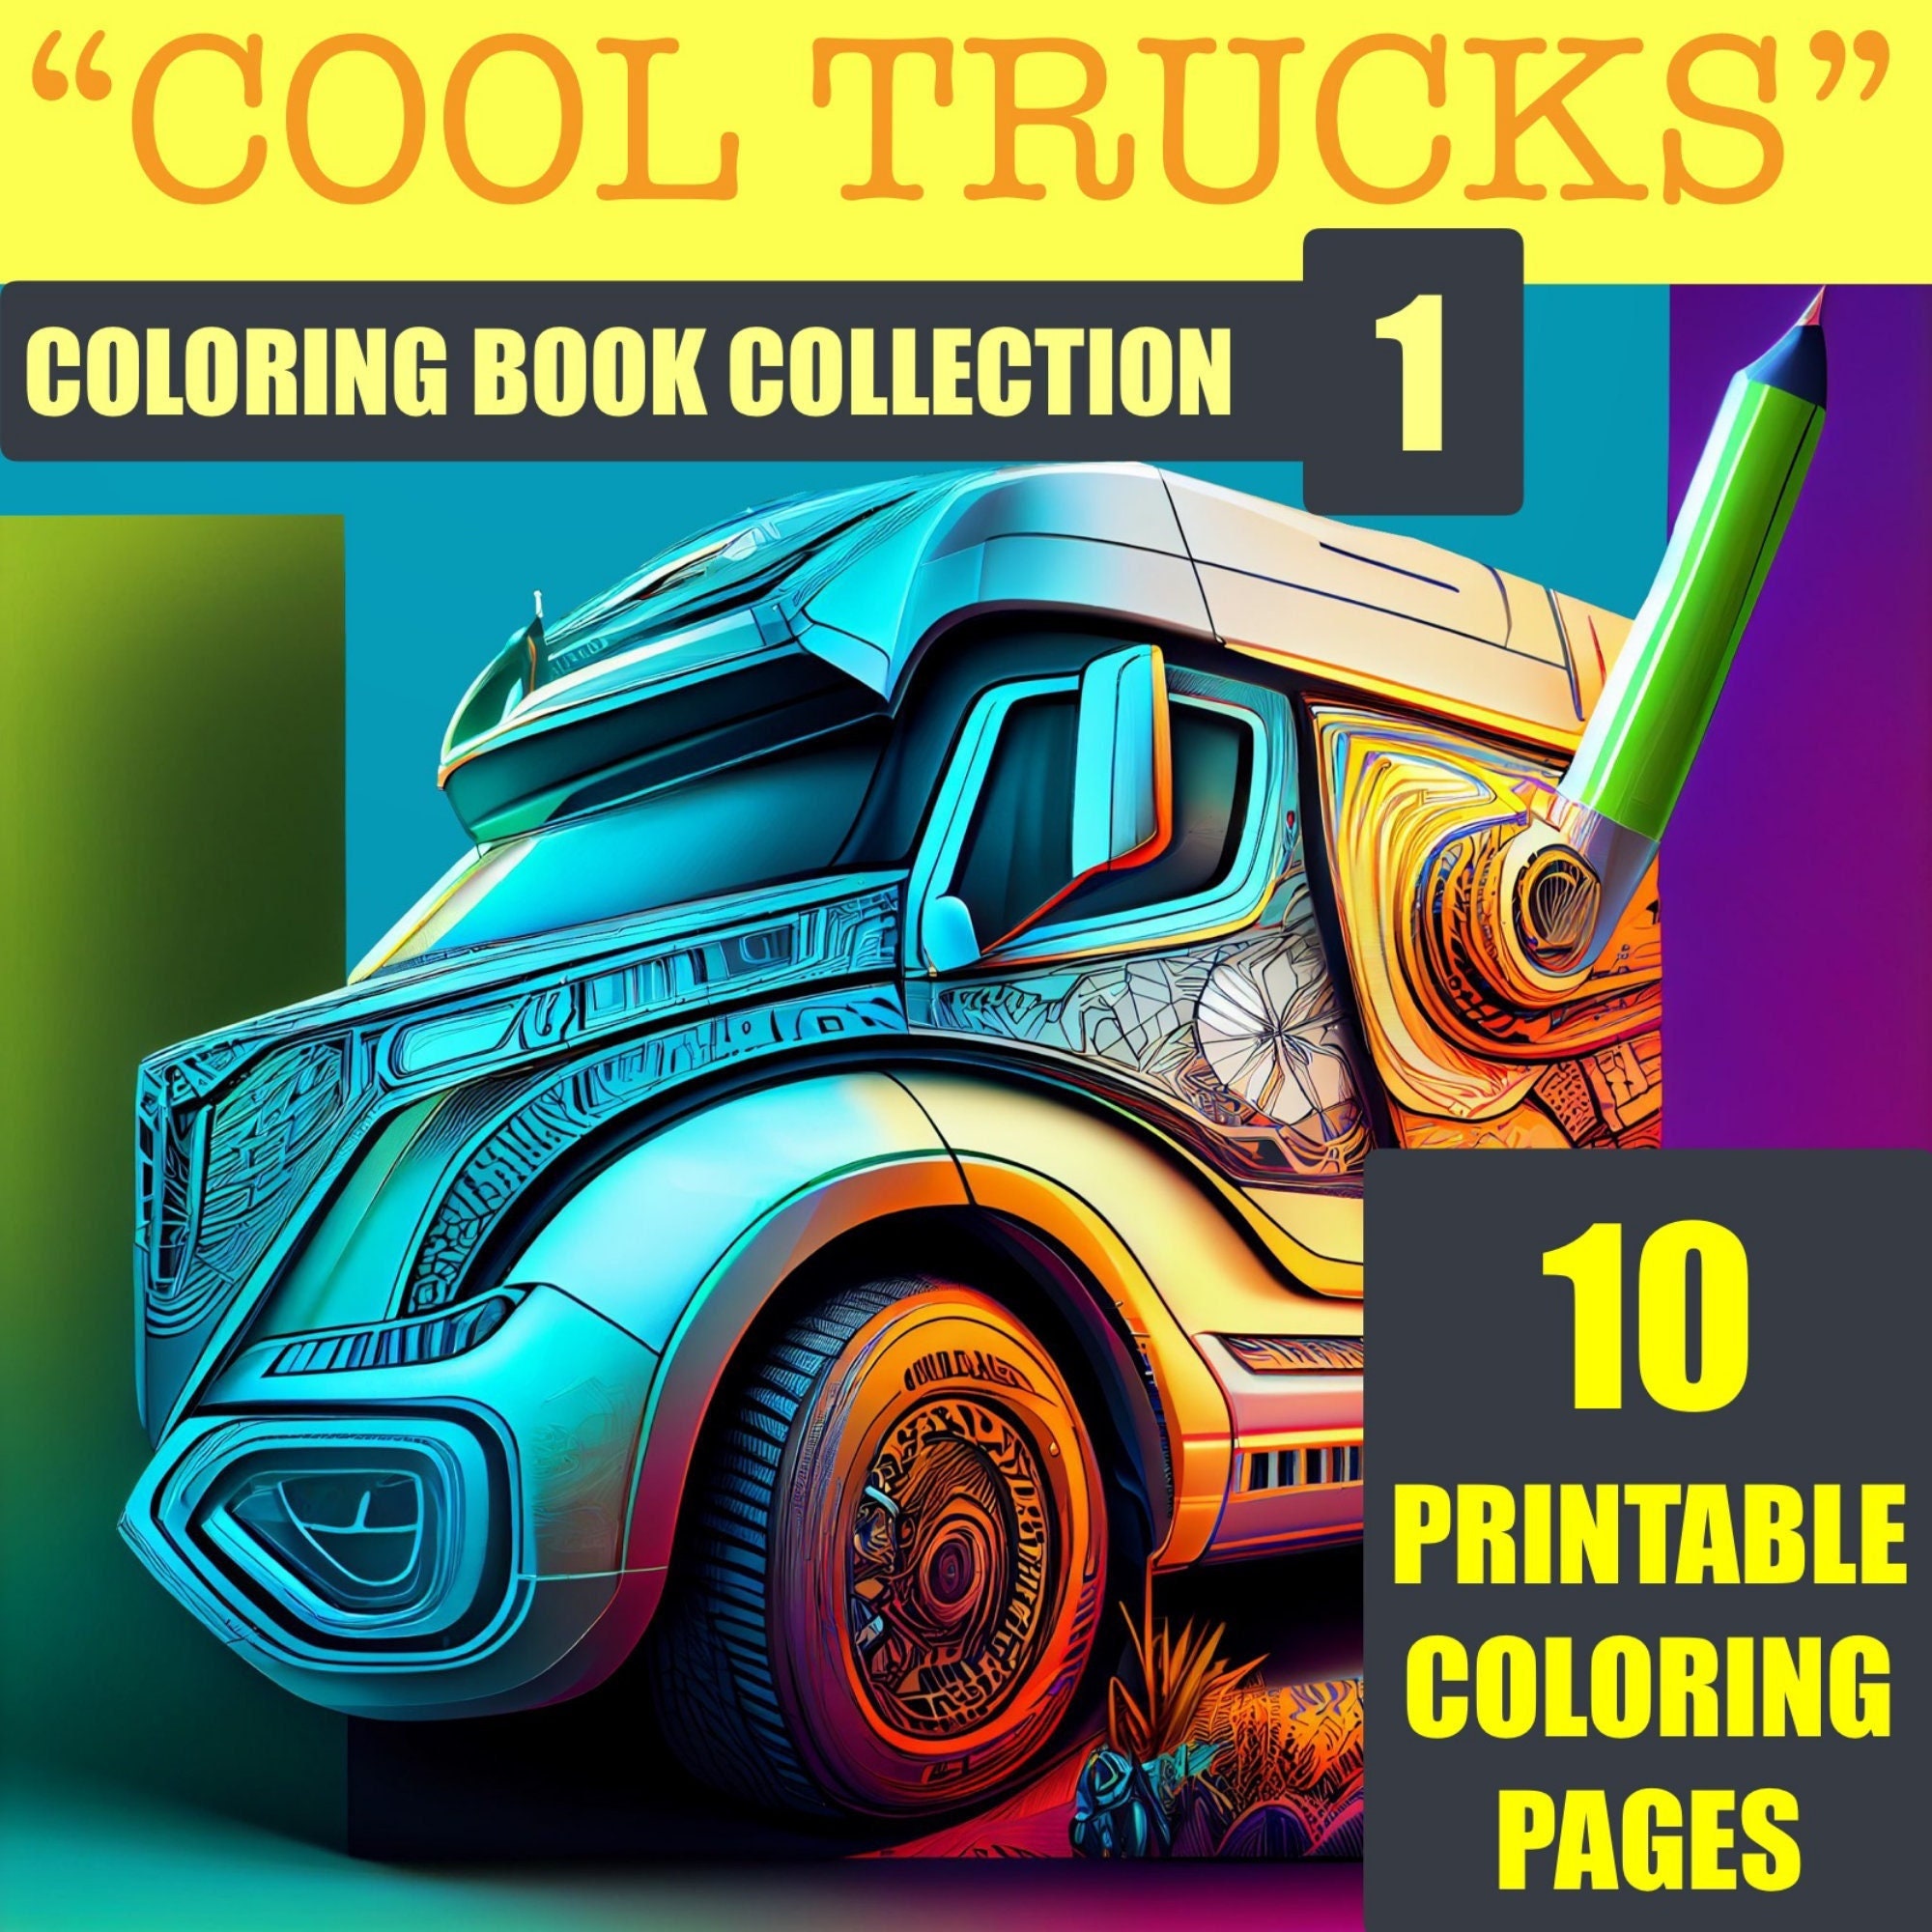 Super Truck Colouring Book Ages 8-12 KiT Publishing: Boys and Girls Coloring  Book, Inspired Designs of Things that Go